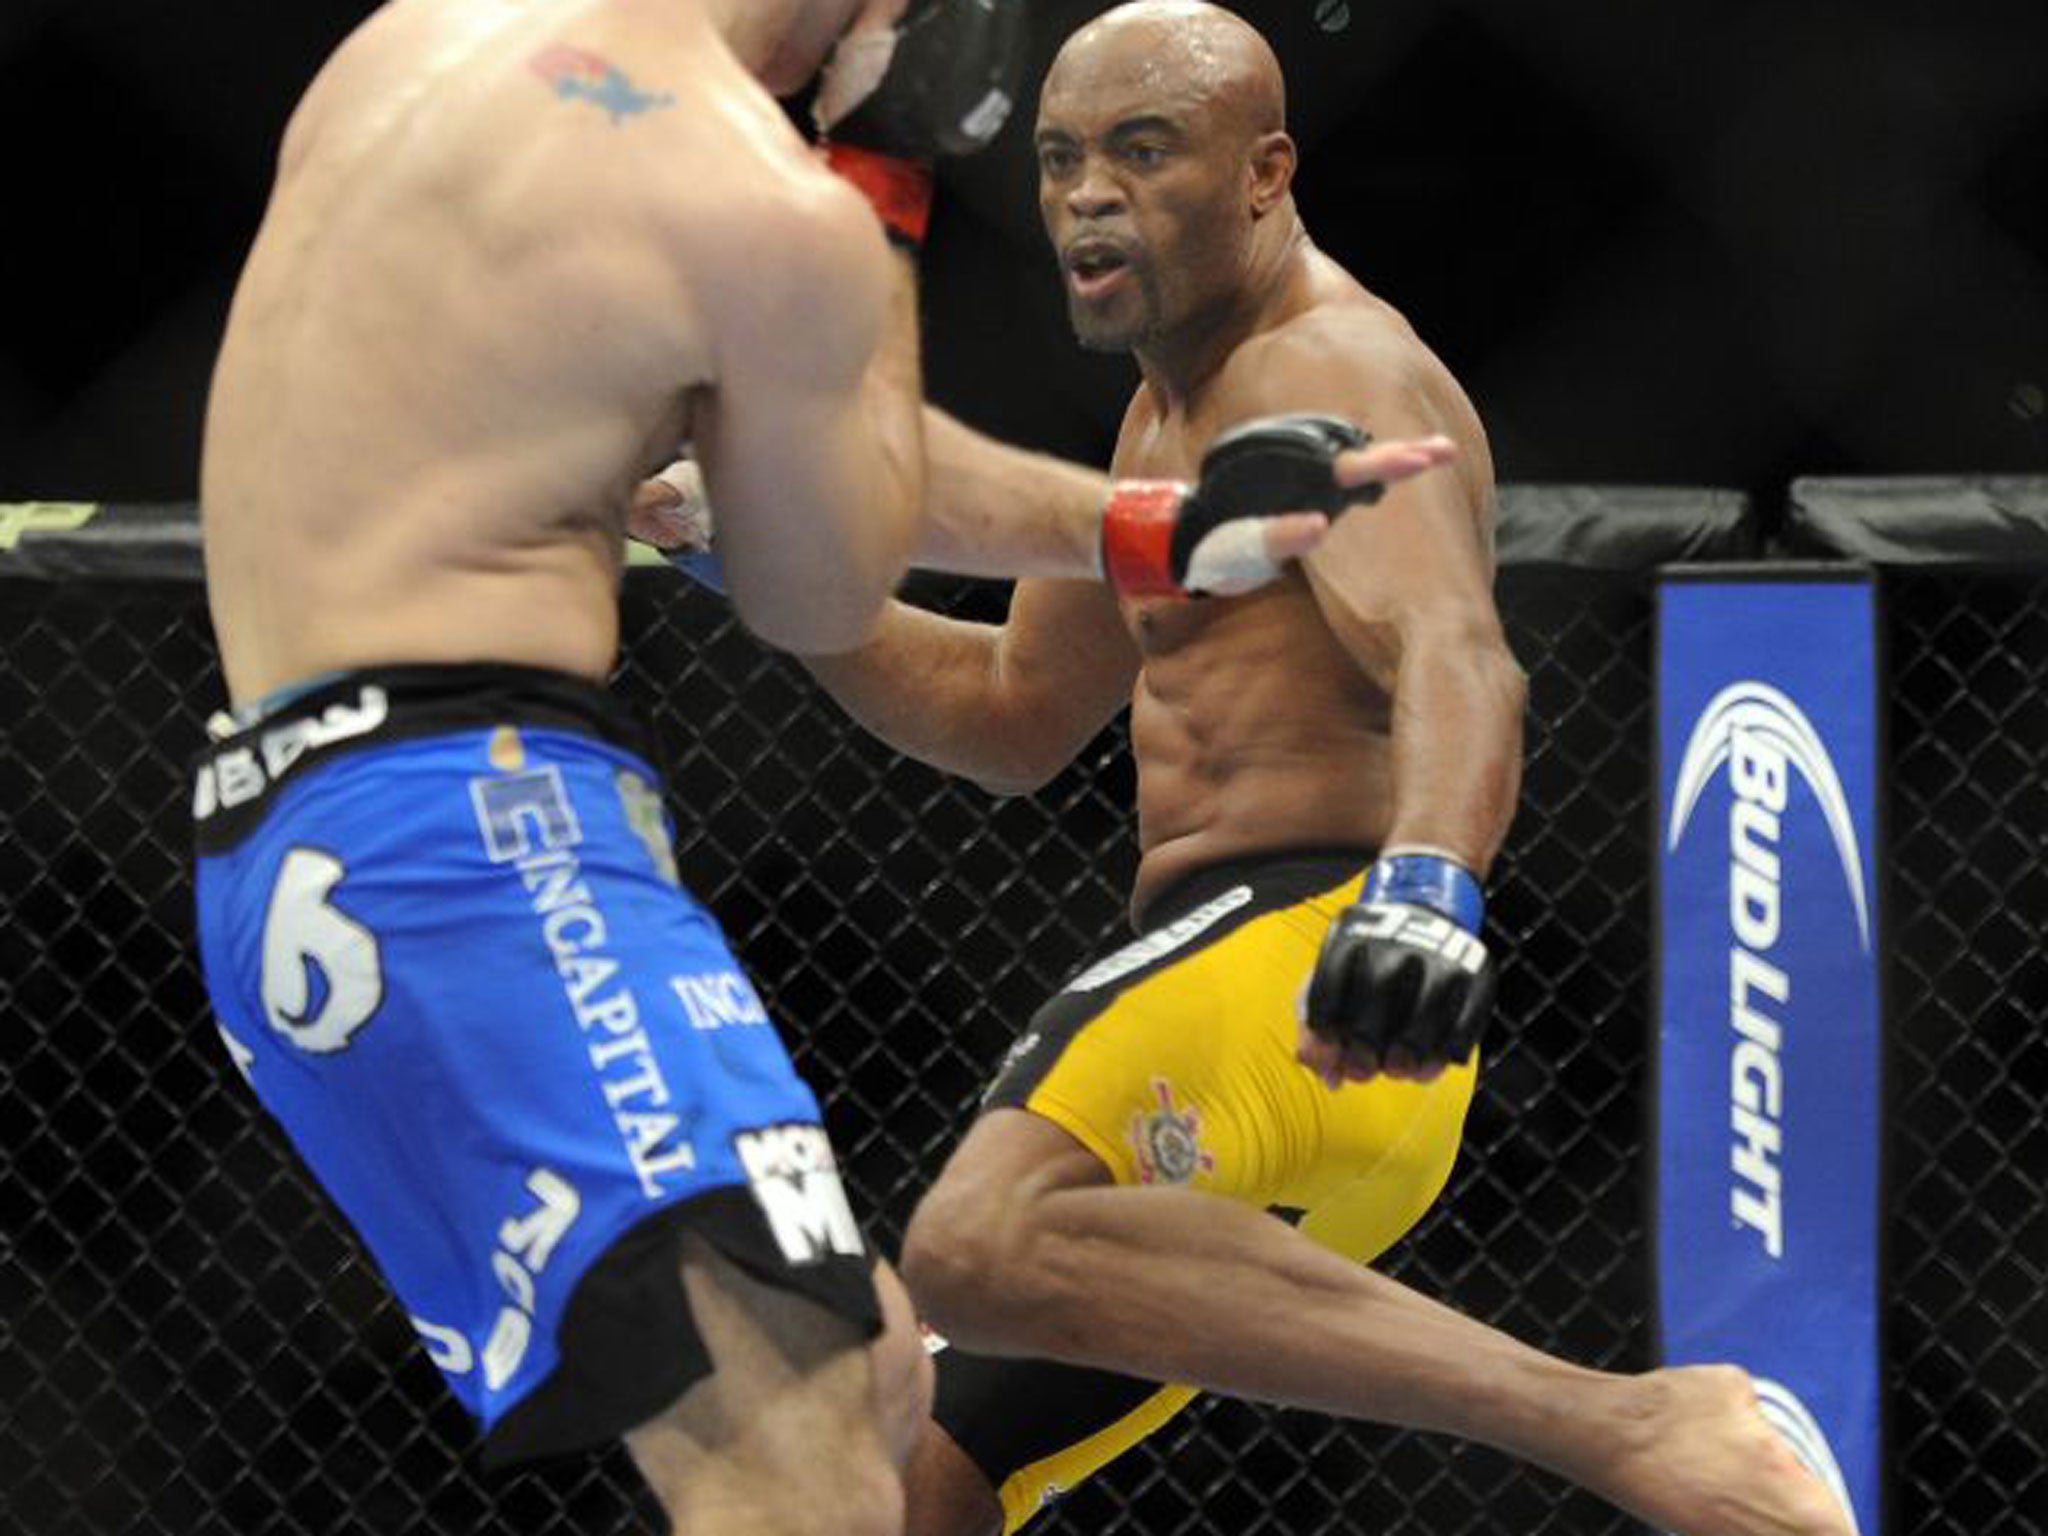 Dana White: “Anderson Silva is the Greatest of All Time; He Does